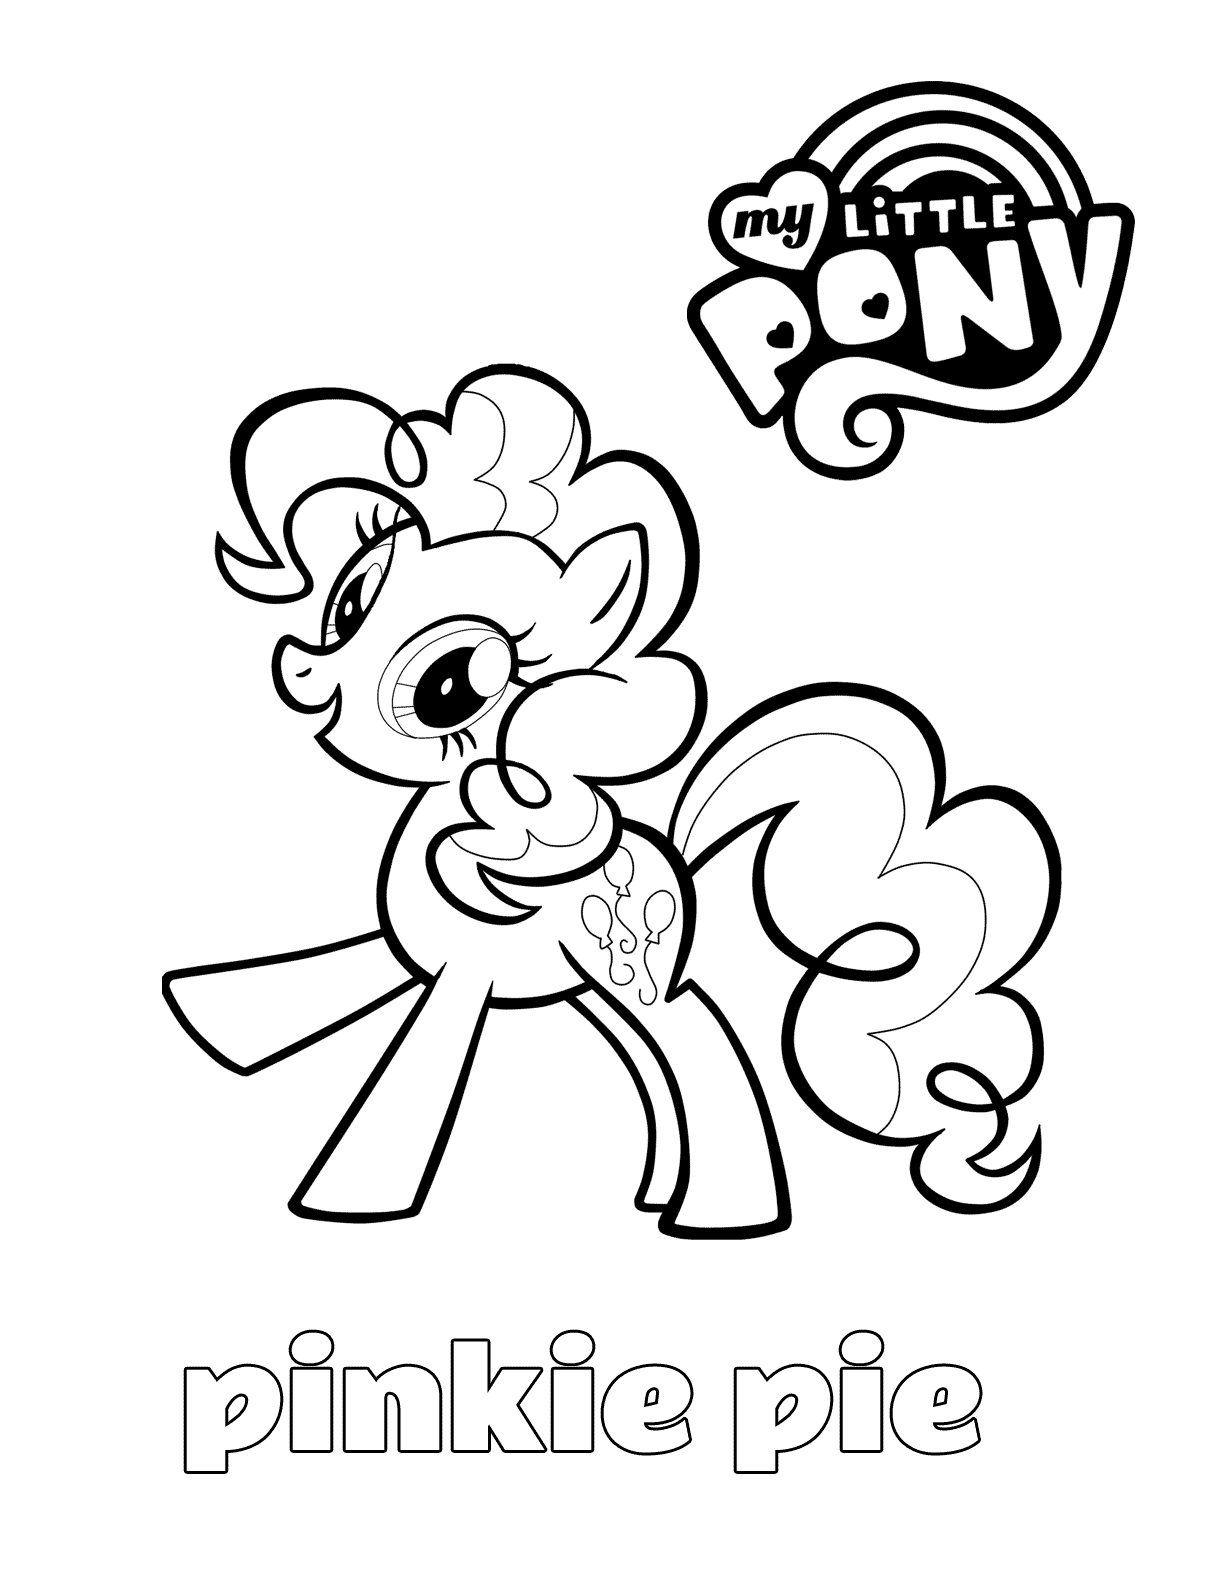 my little pony coloring pages pinkie pie